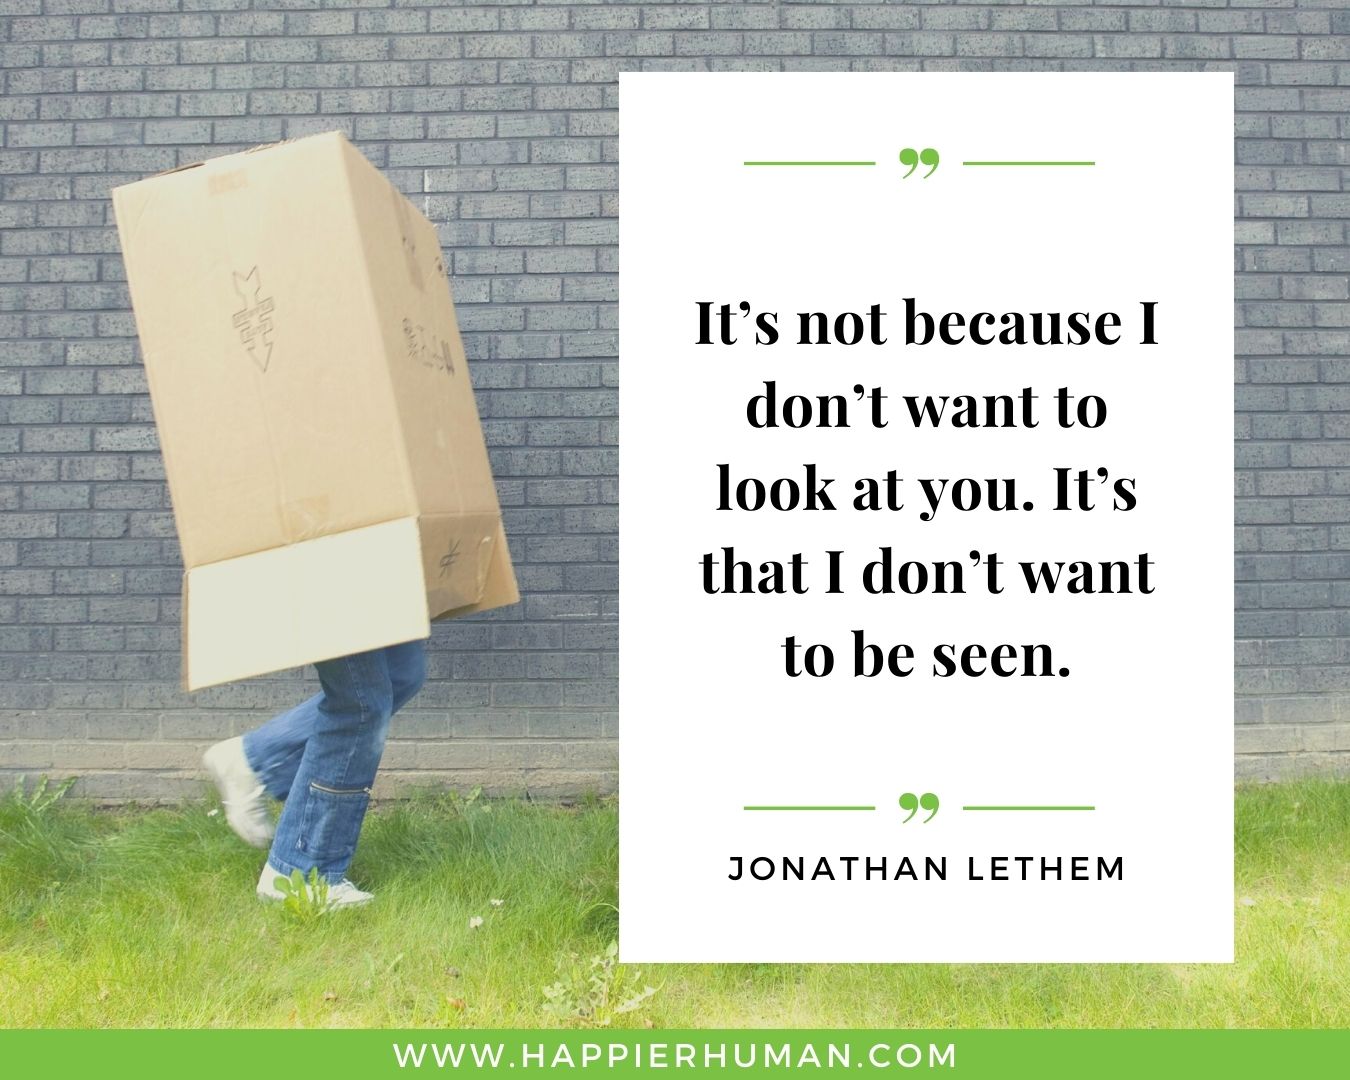 Introvert Quotes - “It’s not because I don’t want to look at you. It’s that I don’t want to be seen.” – Jonathan Lethem